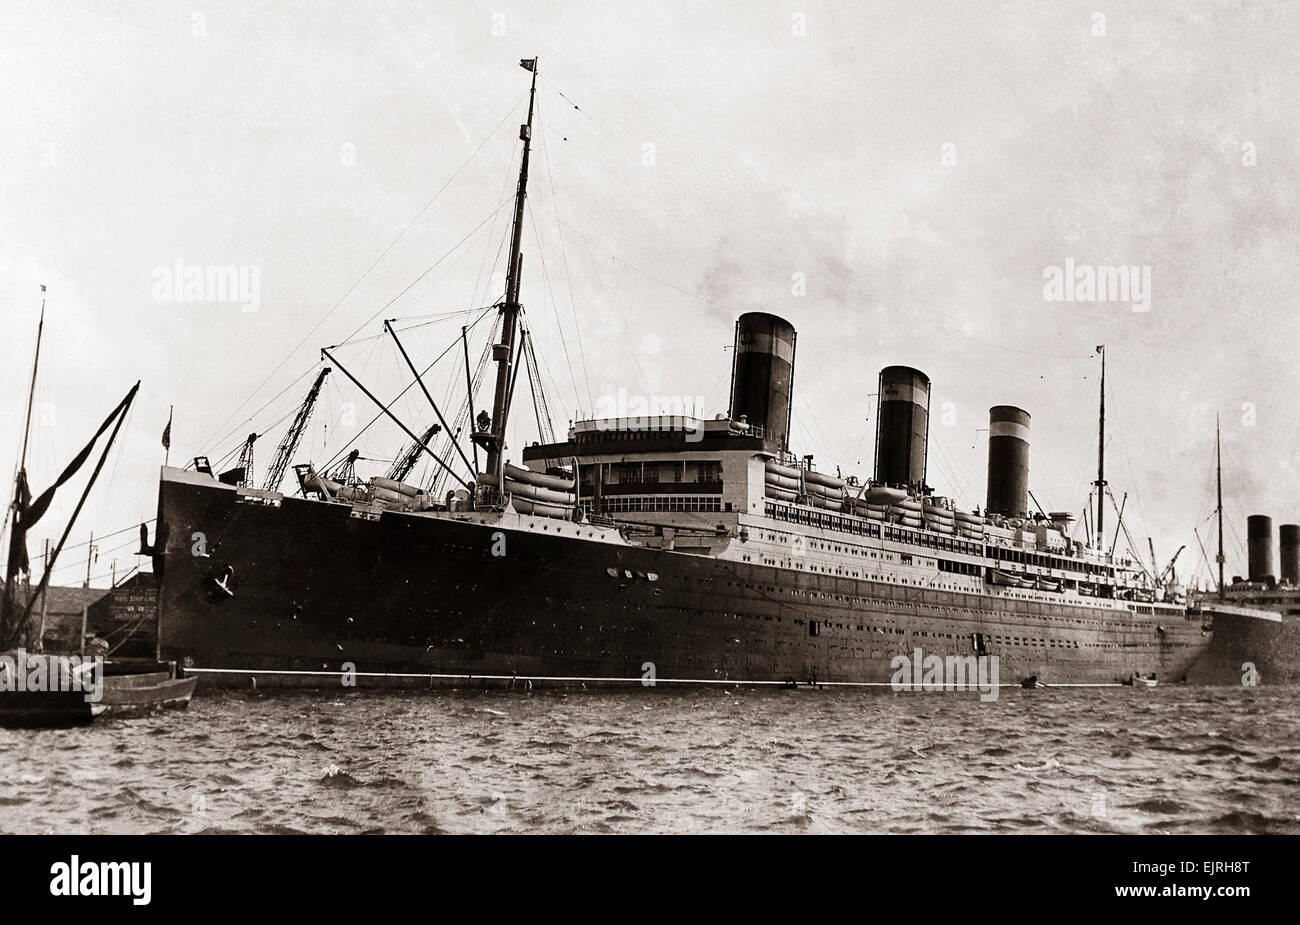 AJAXNETPHOTO. 1930S. SOUTHAMPTON, ENGLAND. - FAMOUS LINER - S.S. LEVIATHAN, FOR YEARS THE LARGEST AMERICAN PASSENGER SHIP, STARTED LIFE AS THE S.S. VATERLAND. REQUISITIONED IN 1917 BY THE U.S.NAVY AND NAMED USS LEVIATHAN.  PHOTO:AJAX VINTAGE PICTURE LIBRARY REF:EPS 21 3 Stock Photo